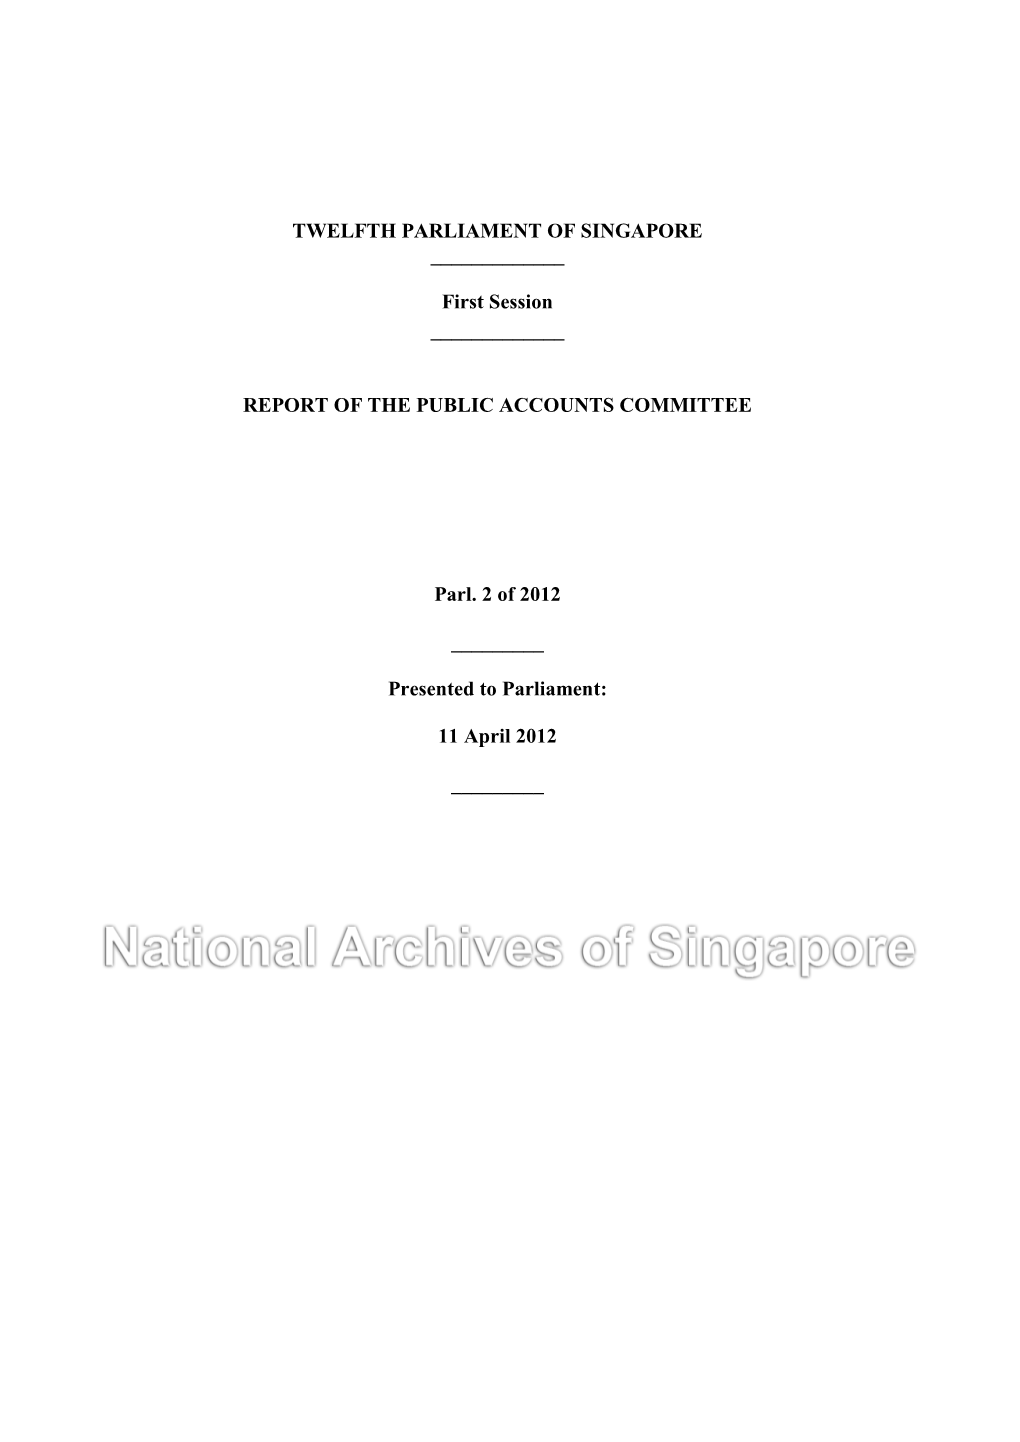 REPORT of the PUBLIC ACCOUNTS COMMITTEE Parl. 2 Of